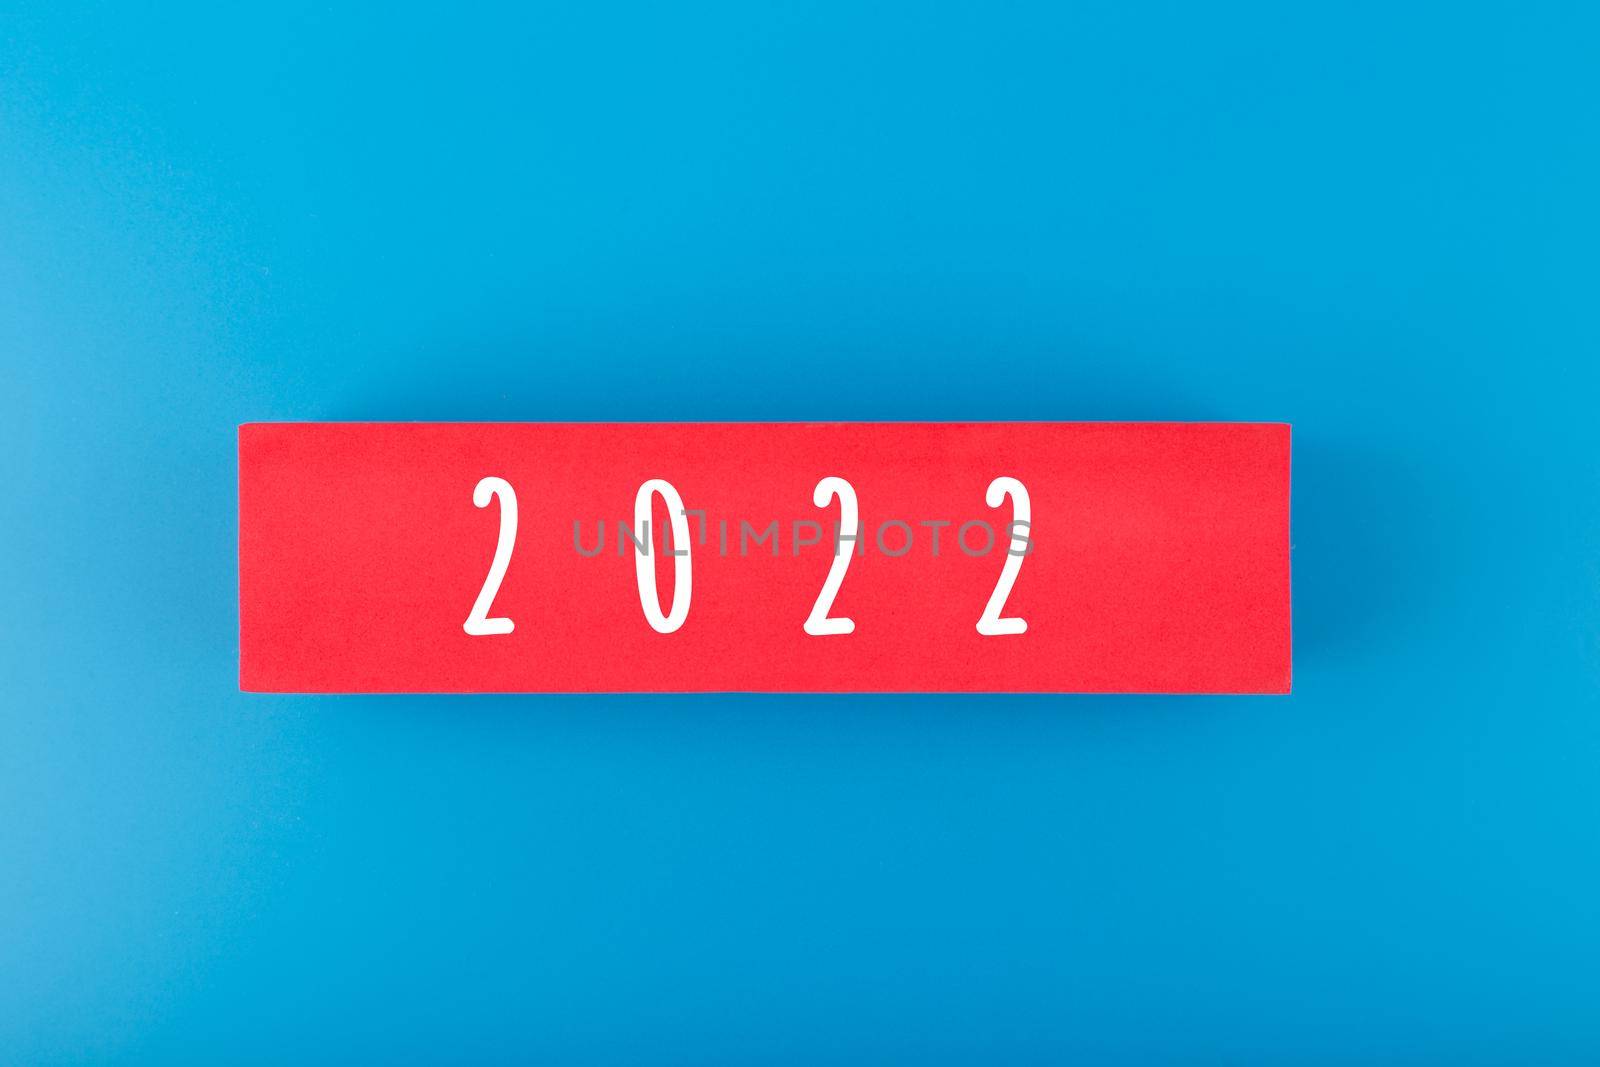 2022 numbers on red rectangle against blue background with copy space by Senorina_Irina